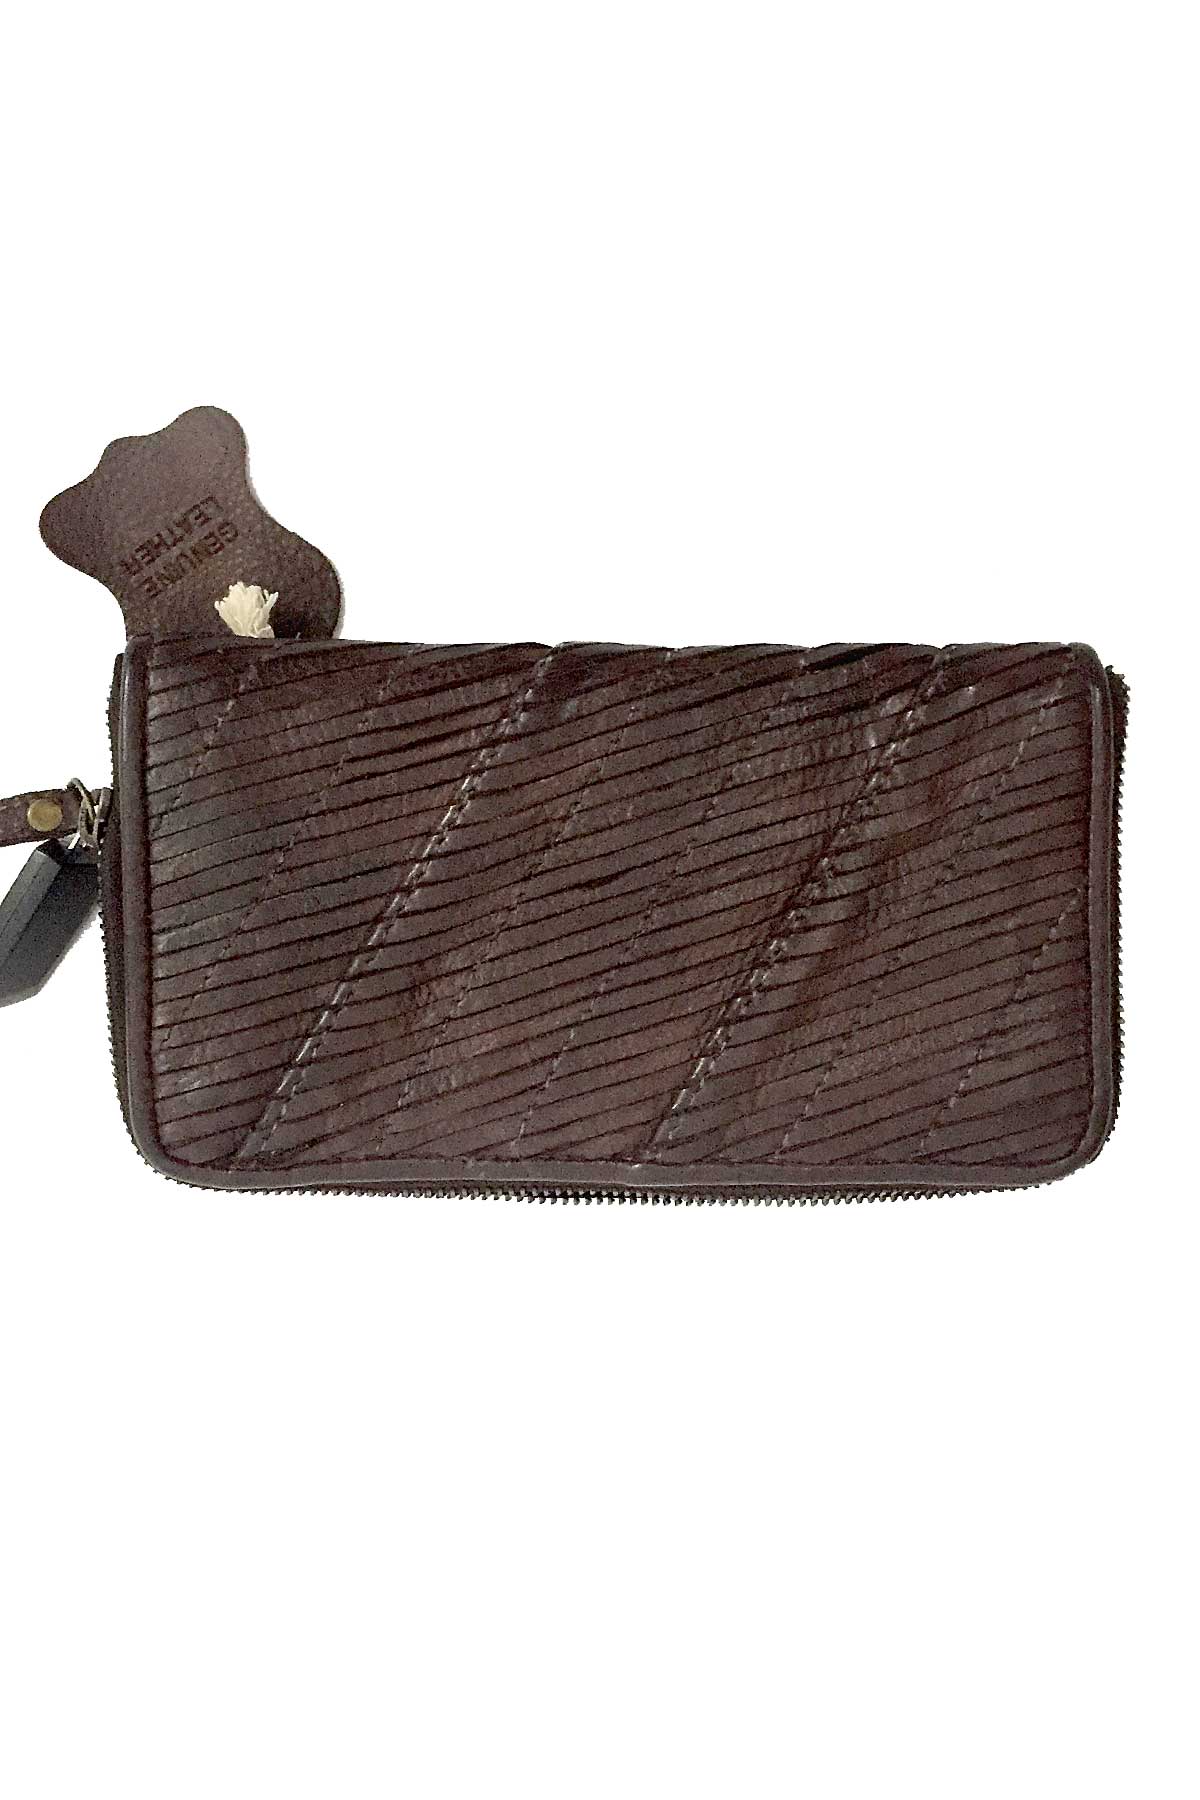 Rugged Hide Kendra Wallet chocolate front